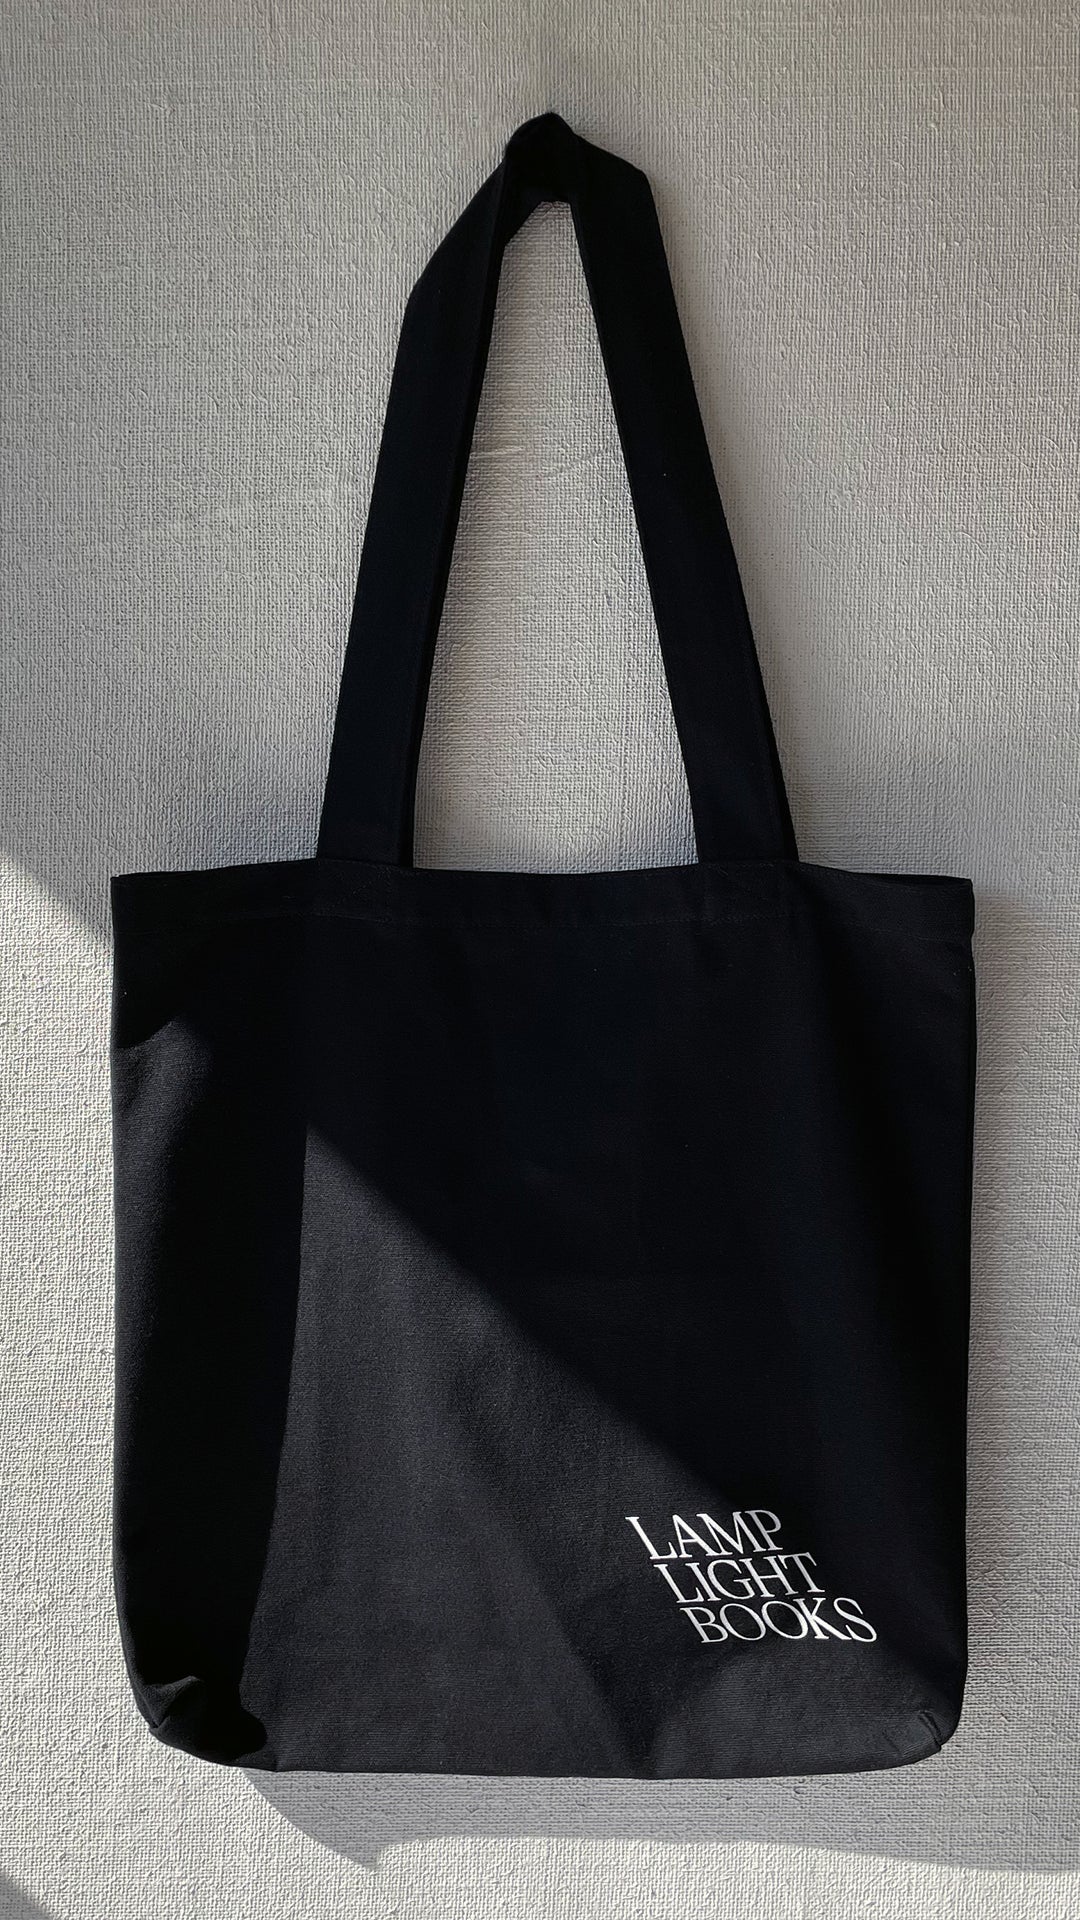 Lamplight Tote Bag cover image